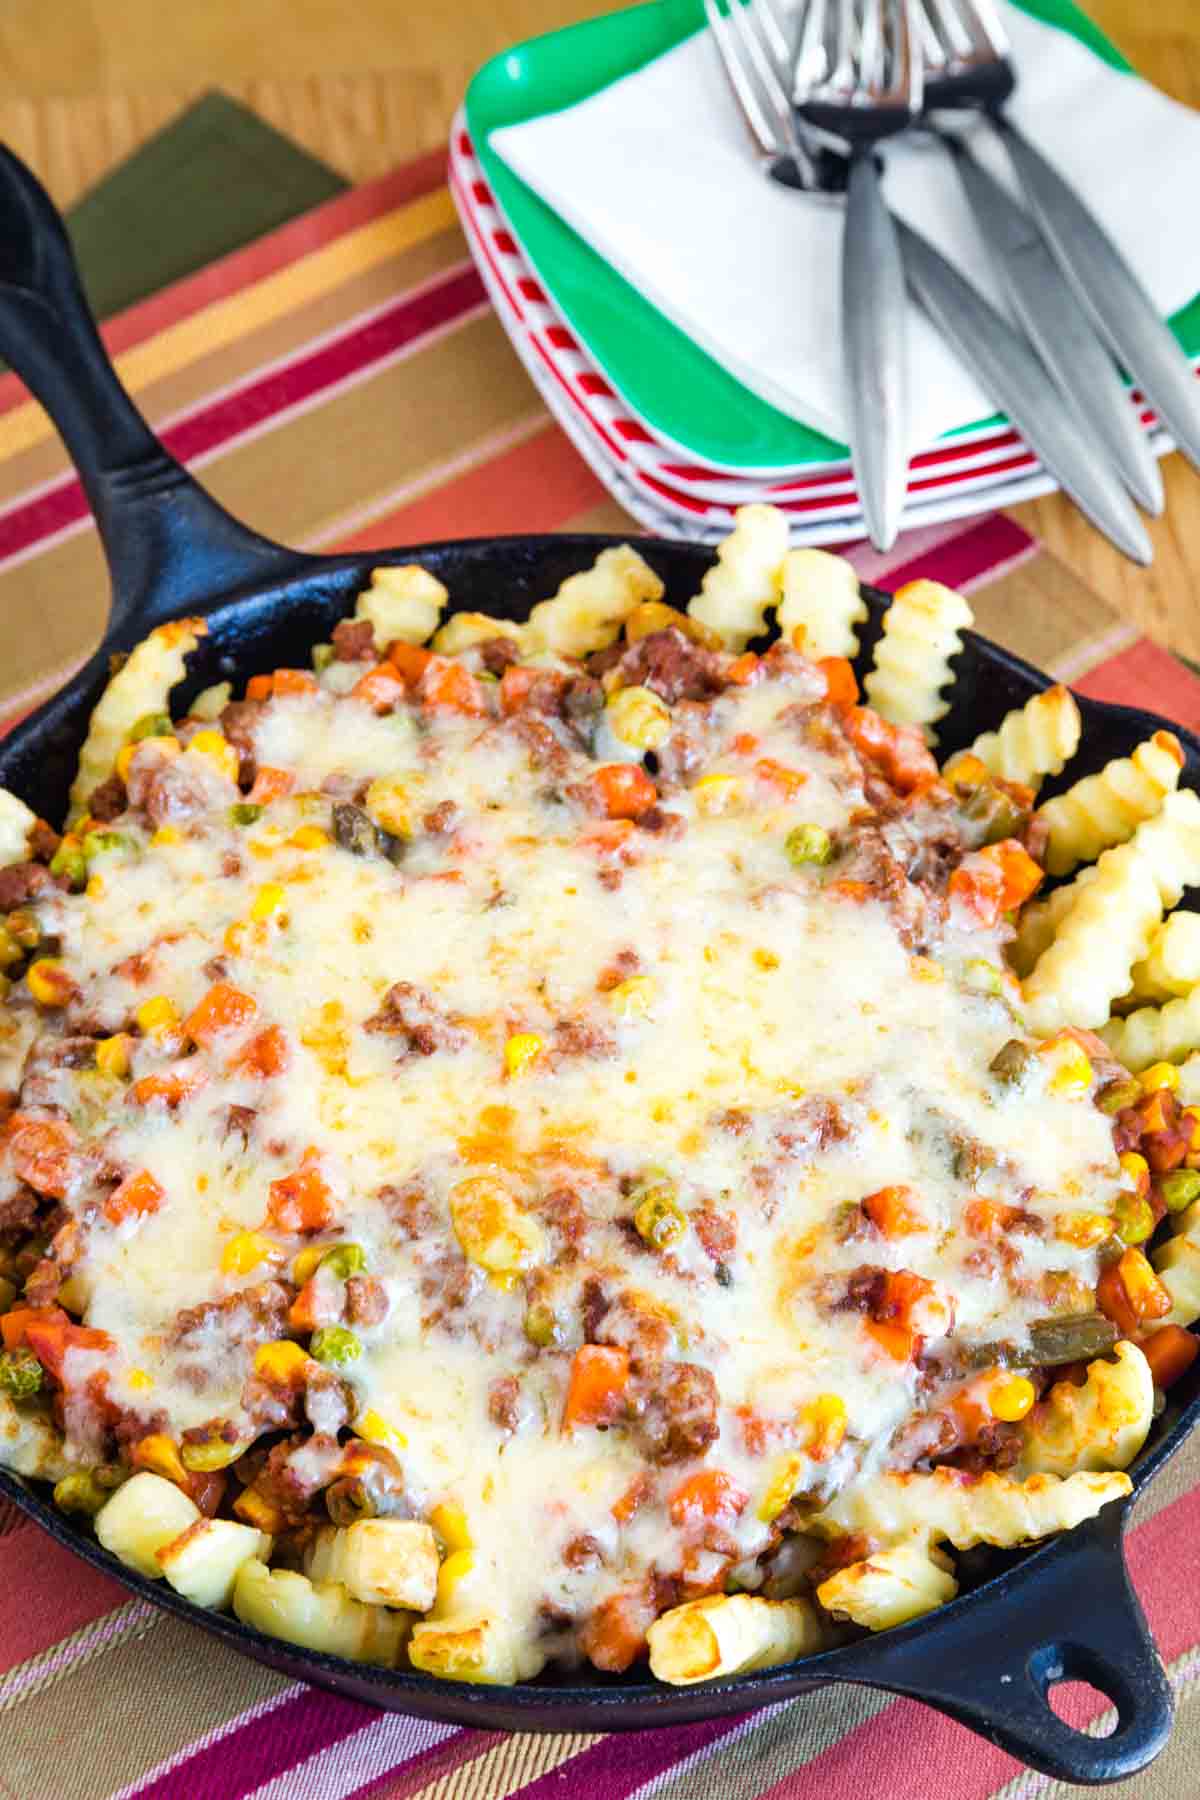 Overhead cast iron skillet with baked french fries topped with a shepherd's pie mixture of ground beef and mixed vegetables and melted cheddar cheese.